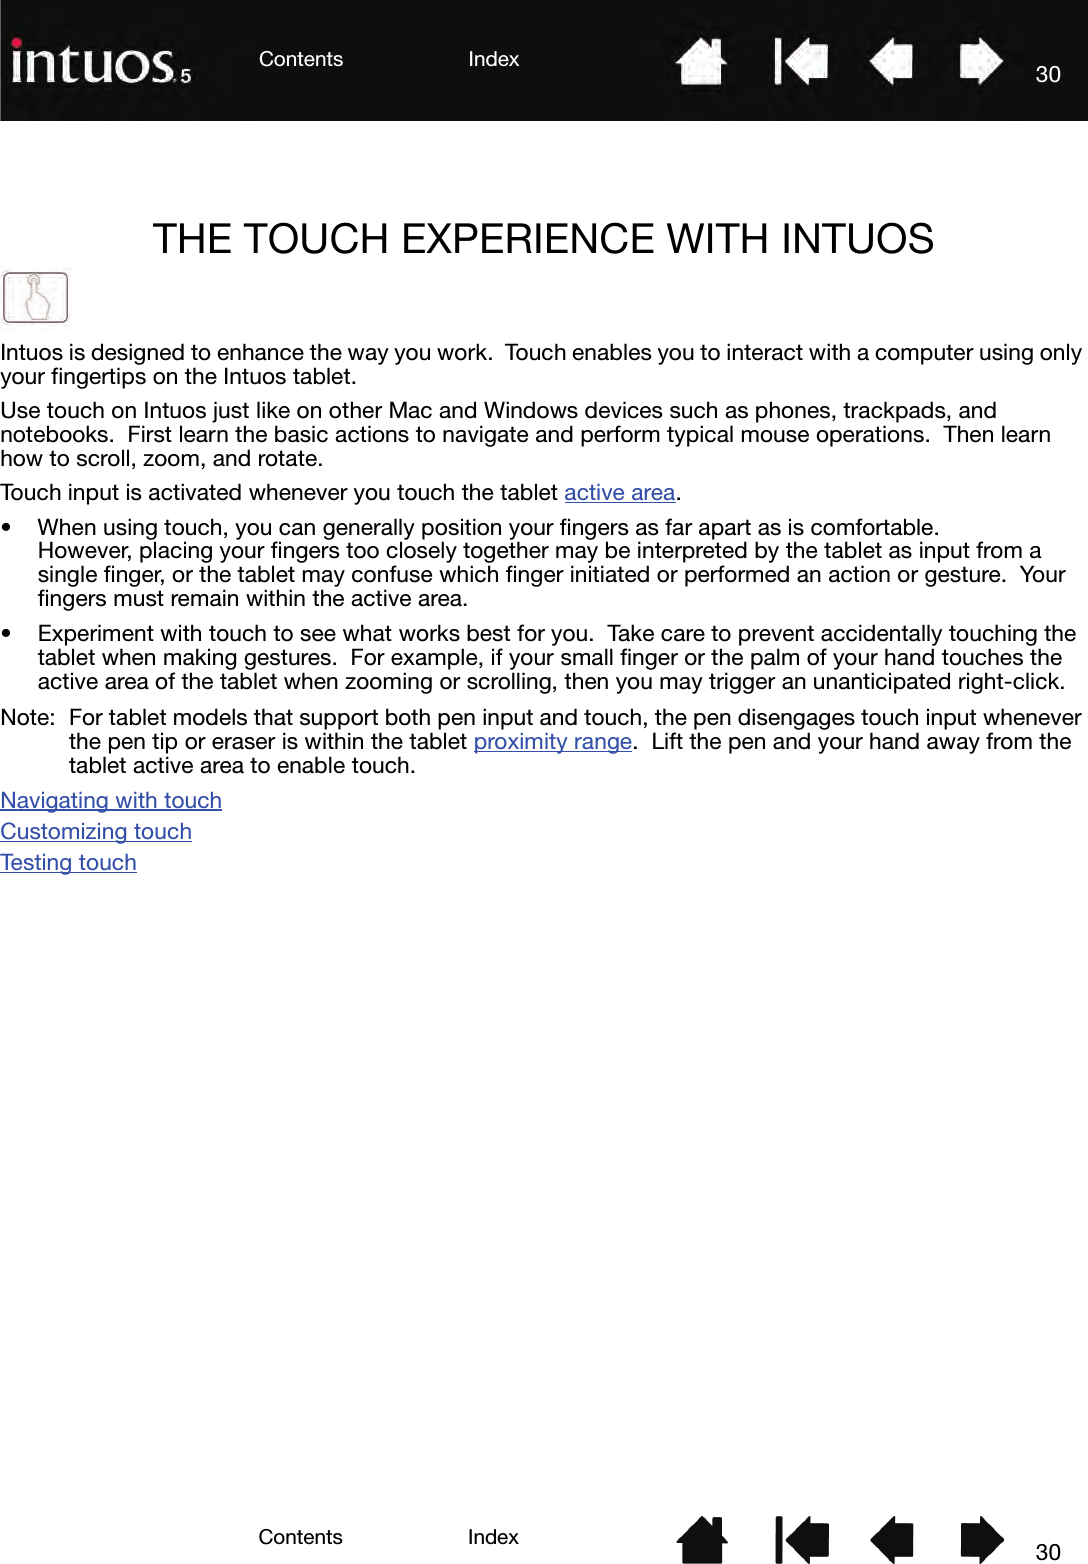 3030IndexContentsIndexContentsTHE TOUCH EXPERIENCE WITH INTUOSIntuos is designed to enhance the way you work.  Touch enables you to interact with a computer using only your fingertips on the Intuos tablet.Use touch on Intuos just like on other Mac and Windows devices such as phones, trackpads, and notebooks.  First learn the basic actions to navigate and perform typical mouse operations.  Then learn how to scroll, zoom, and rotate.Touch input is activated whenever you touch the tablet active area.• When using touch, you can generally position your fingers as far apart as is comfortable.  However, placing your fingers too closely together may be interpreted by the tablet as input from a single finger, or the tablet may confuse which finger initiated or performed an action or gesture.  Your fingers must remain within the active area.• Experiment with touch to see what works best for you.  Take care to prevent accidentally touching the tablet when making gestures.  For example, if your small finger or the palm of your hand touches the active area of the tablet when zooming or scrolling, then you may trigger an unanticipated right-click.Note: For tablet models that support both pen input and touch, the pen disengages touch input whenever the pen tip or eraser is within the tablet proximity range.  Lift the pen and your hand away from the tablet active area to enable touch.Navigating with touchCustomizing touchTes t in g  to u ch